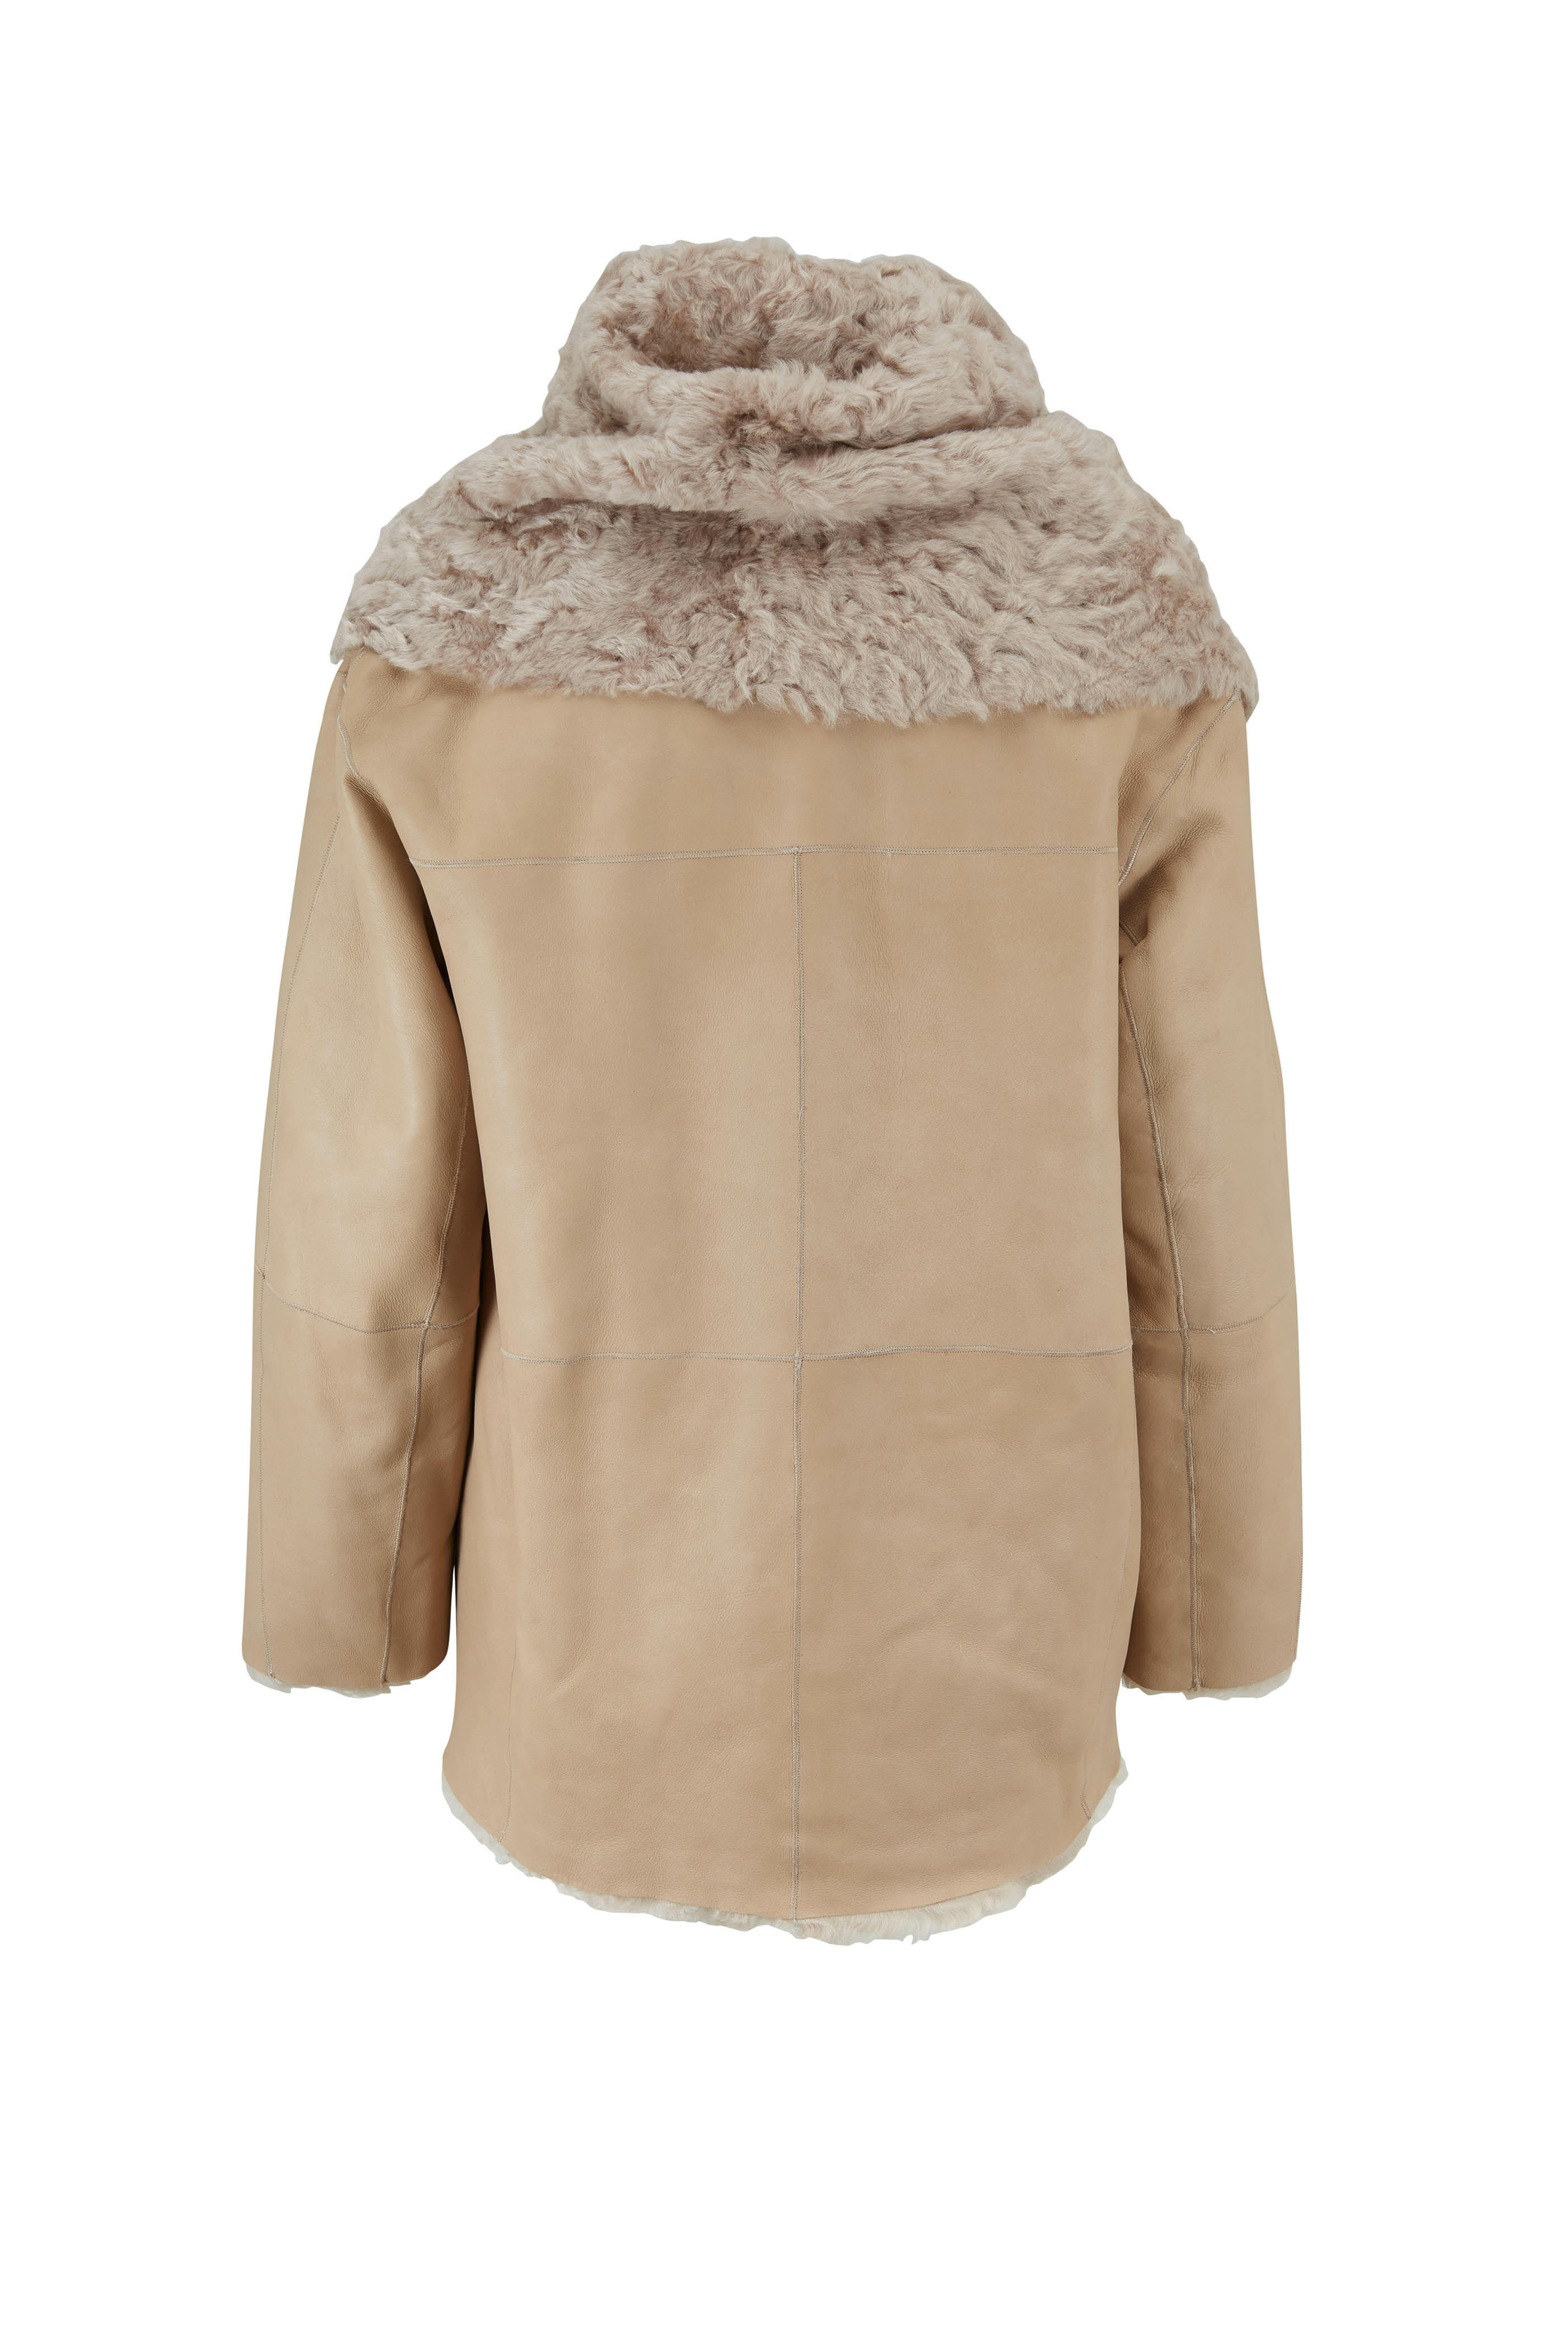 Vince - Cream Shearling Cardi Coat | Mitchell Stores